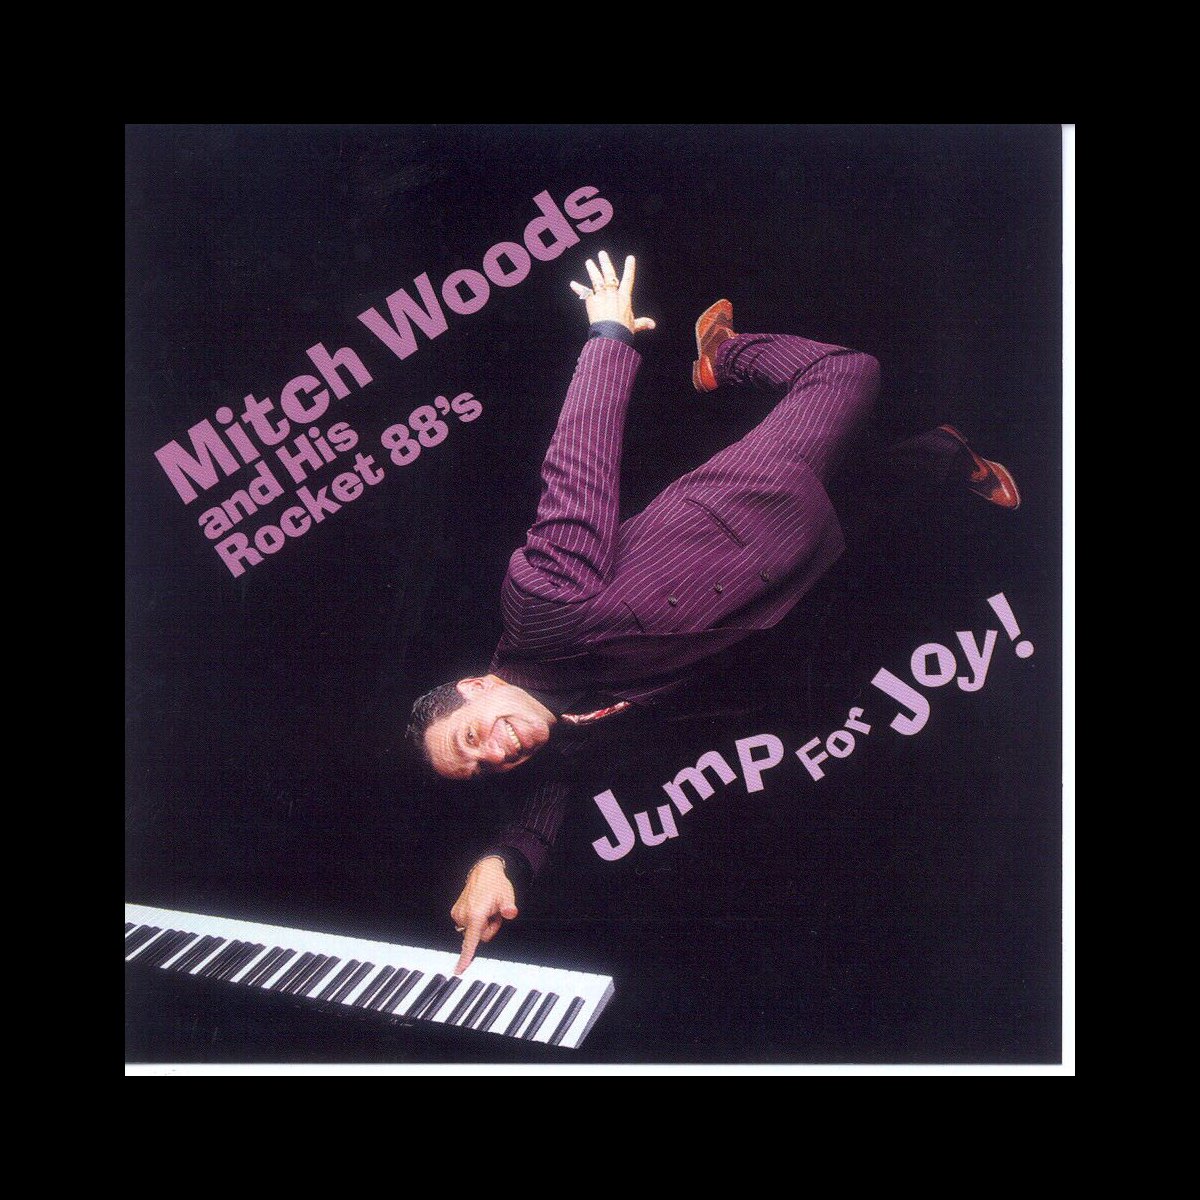 MITCH WOODS - FRIENDS ALONG THE WAY - 2 CD DELUXE EDITION - Blues